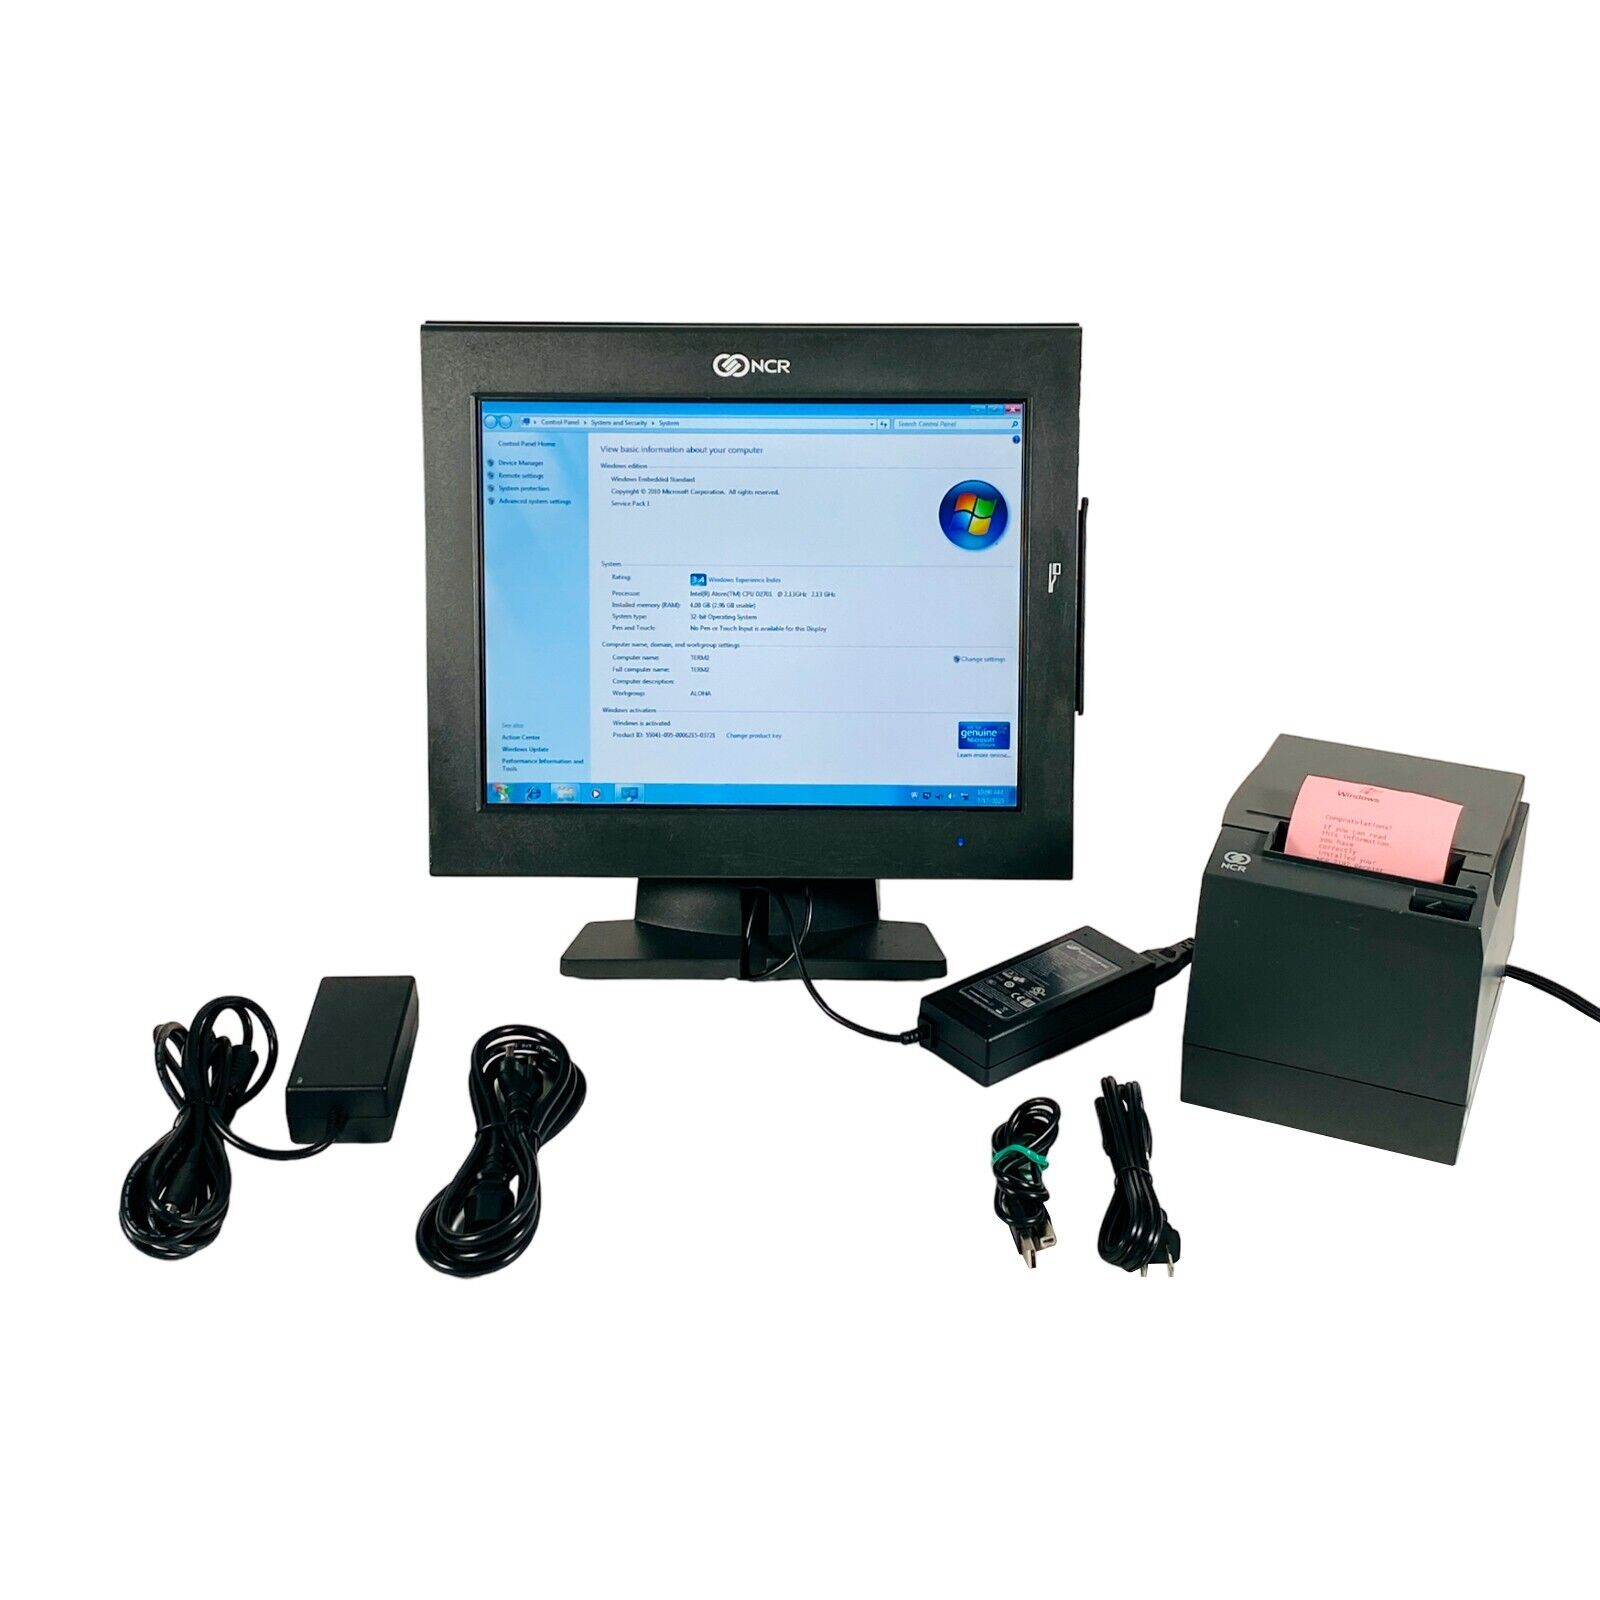 NCR POS Touchscreen Terminal 7754 with Receipt Printer - Fully Tested